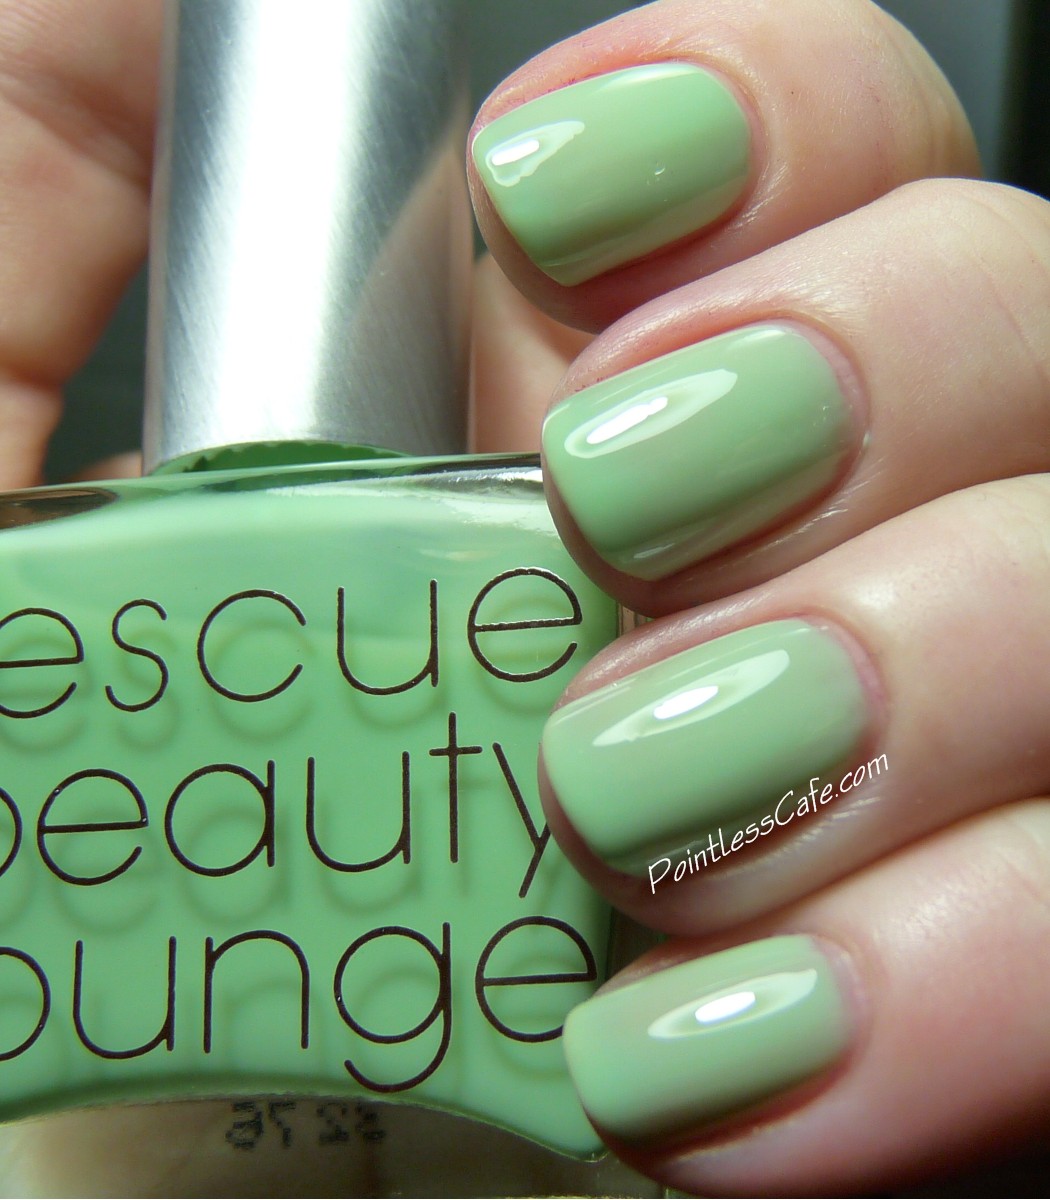 KellieGonzo: Rescue Beauty Lounge Fan Collection 2.0 Swatches and Review